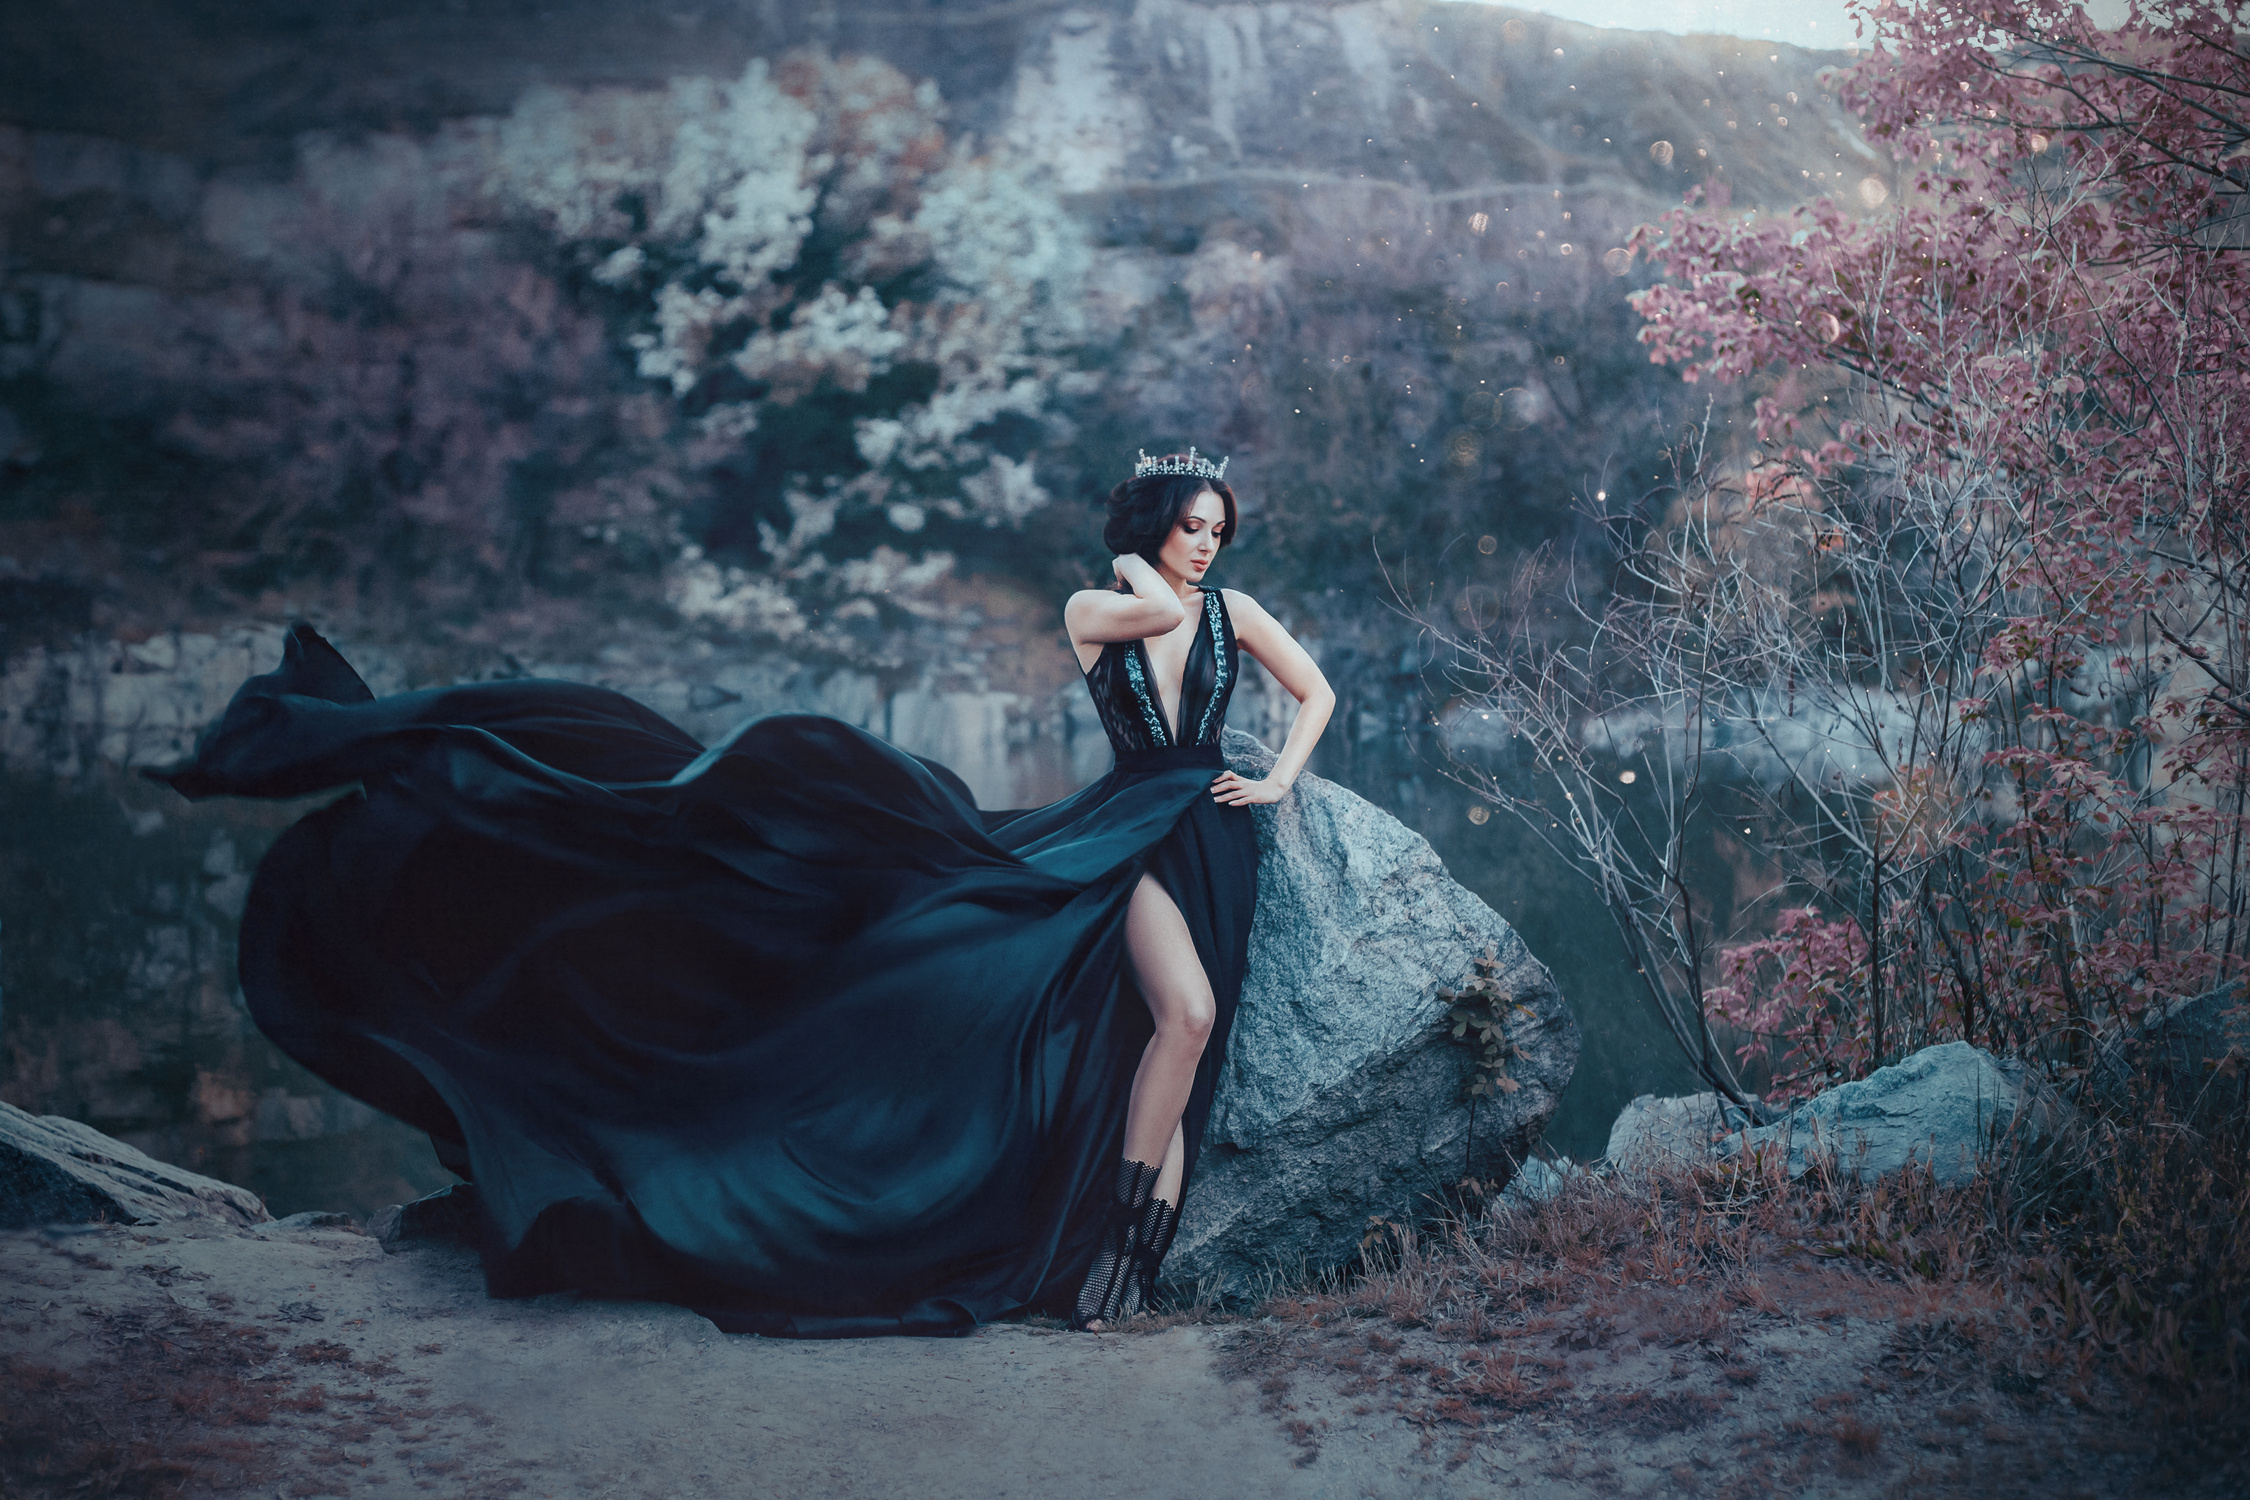 The dark queen pose against the background of gloomy rocks. A luxurious black dress with a long train fluttering in the wind denuding her leg. Elegant, collected hairstyle with a gothic crown